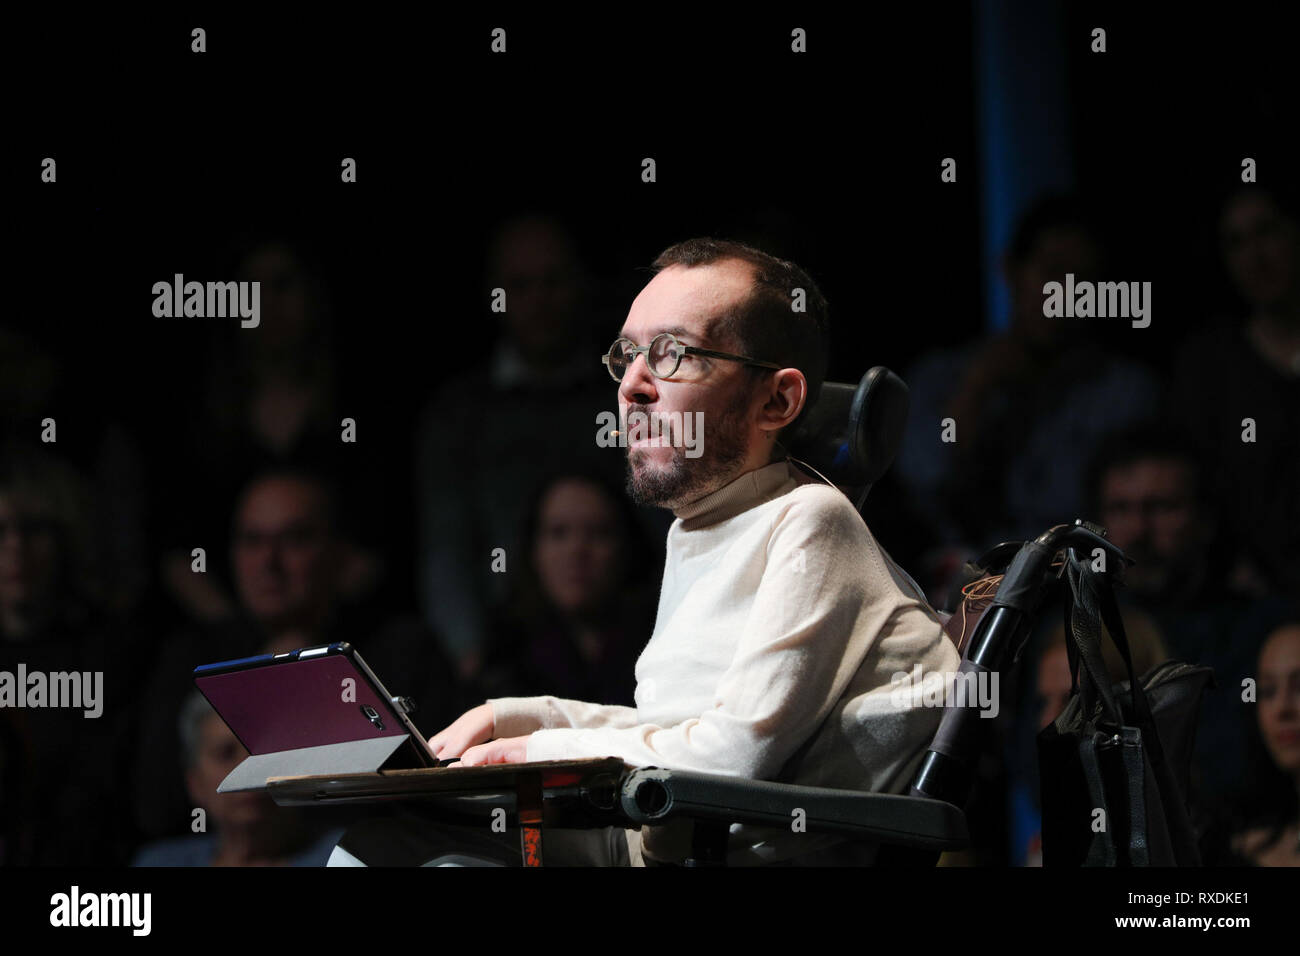 Madrid, Spain. 09th March, 2019.Pablo Echenique seen speaking at the closing of the event # PodemosEnMarcha2019 Credit: Jesús Hellin/Alamy Live News Stock Photo